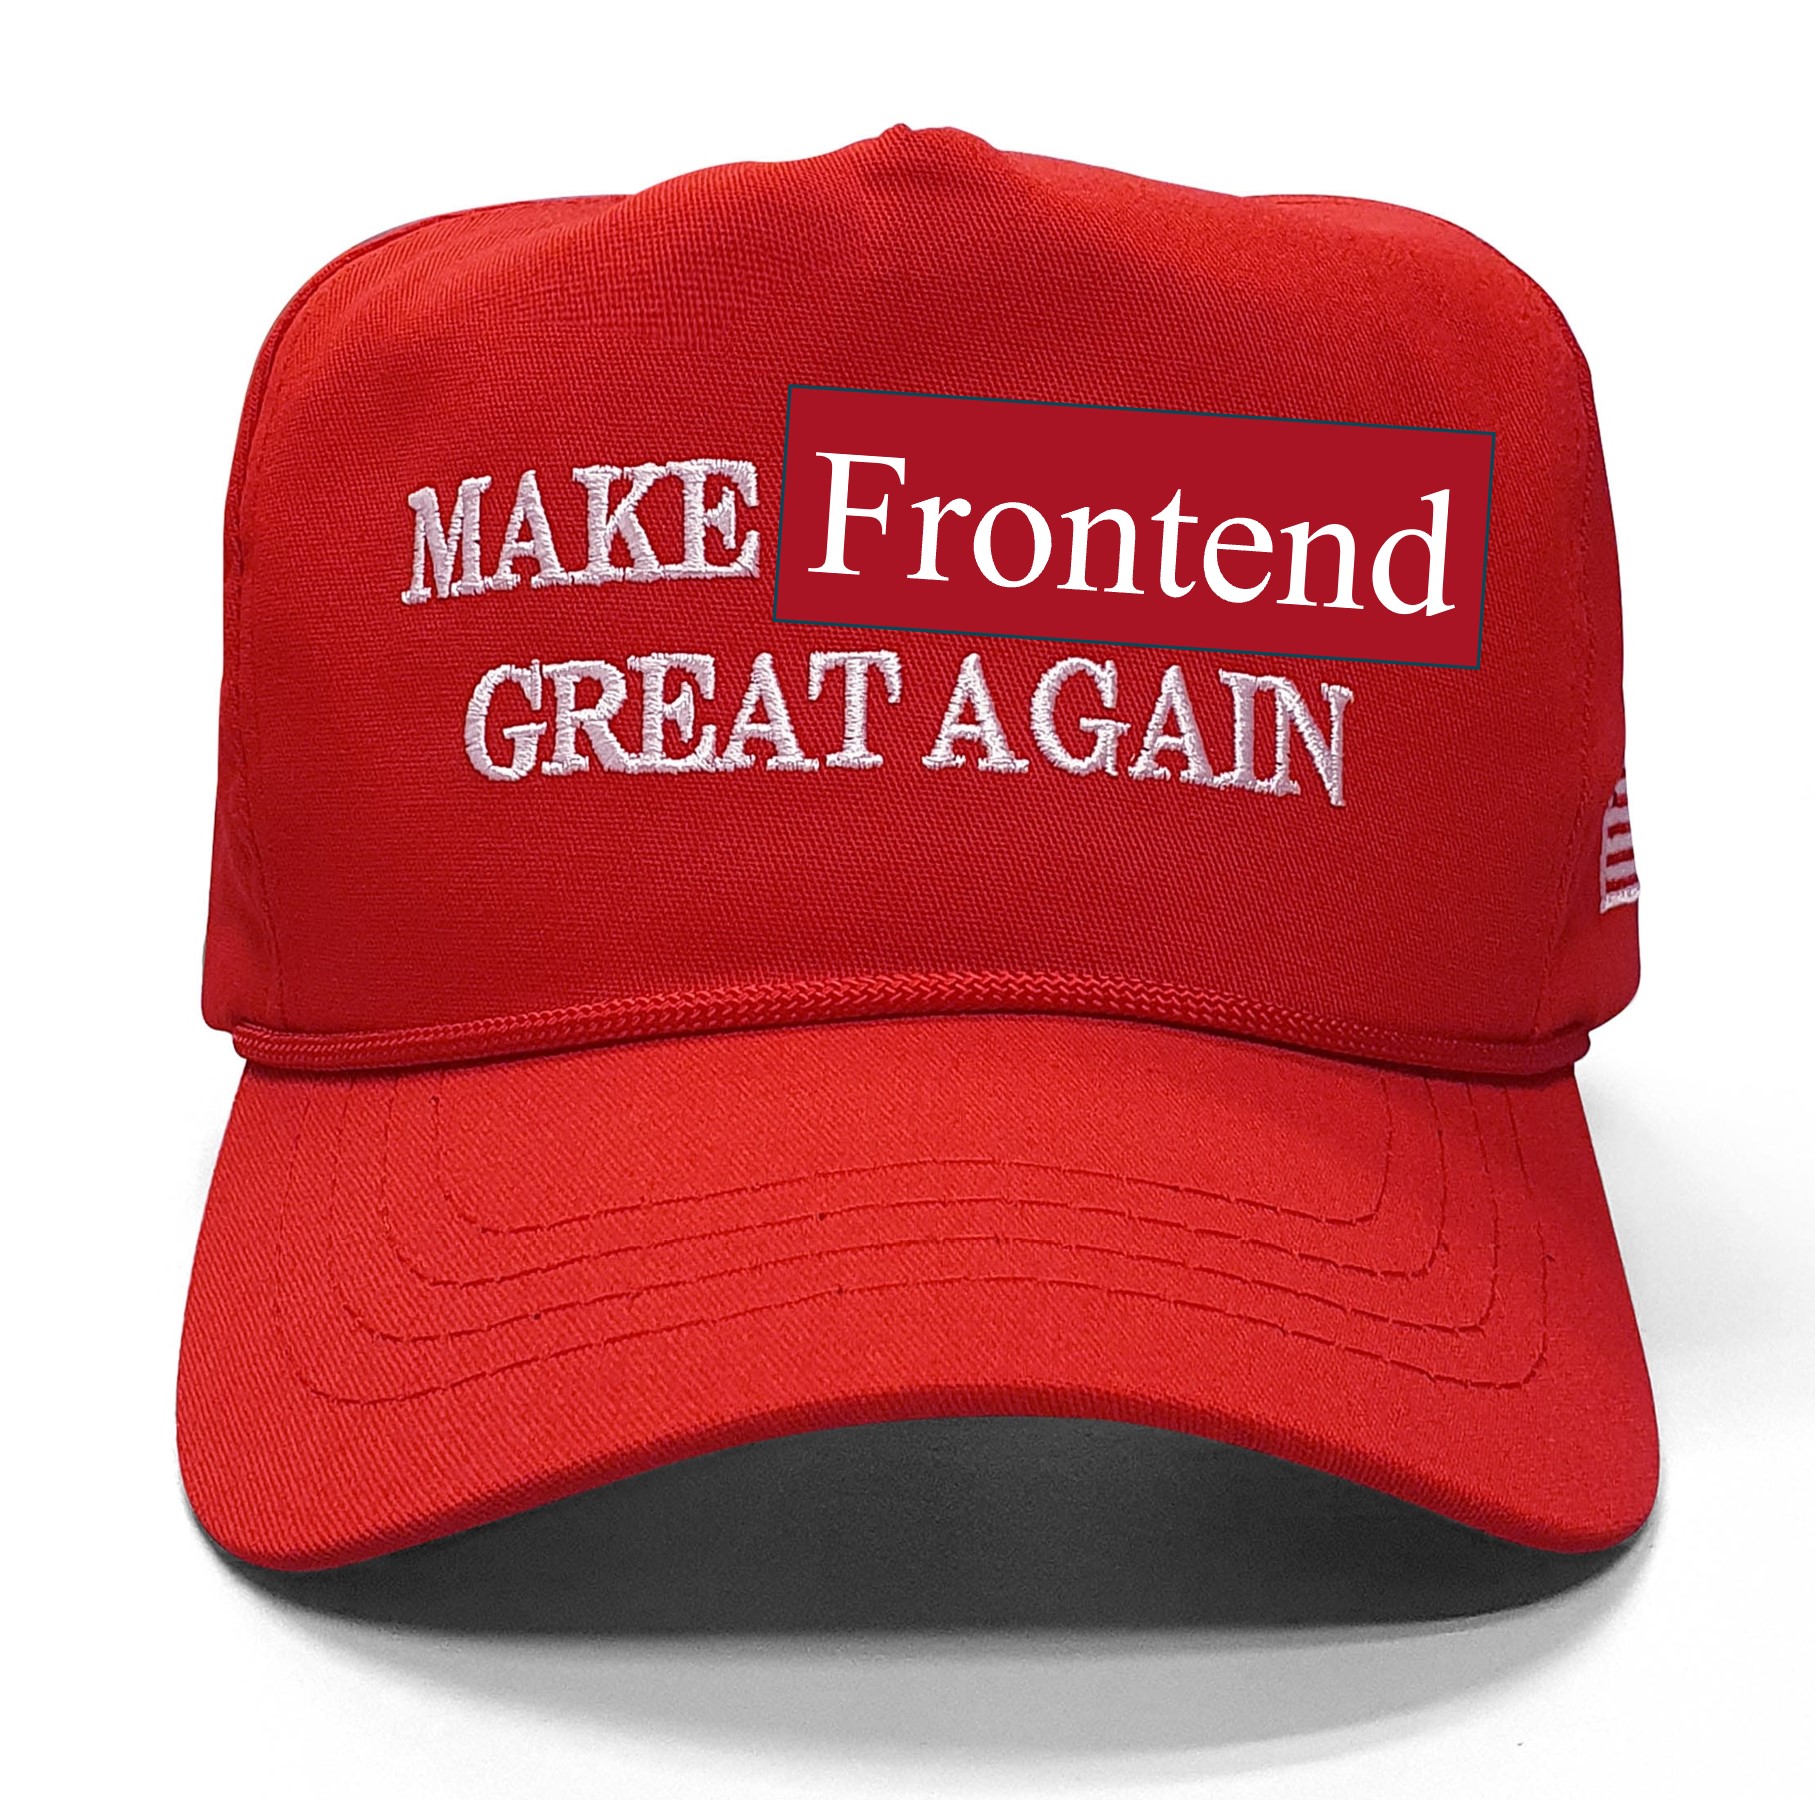 Let's Make Frontend Great Again